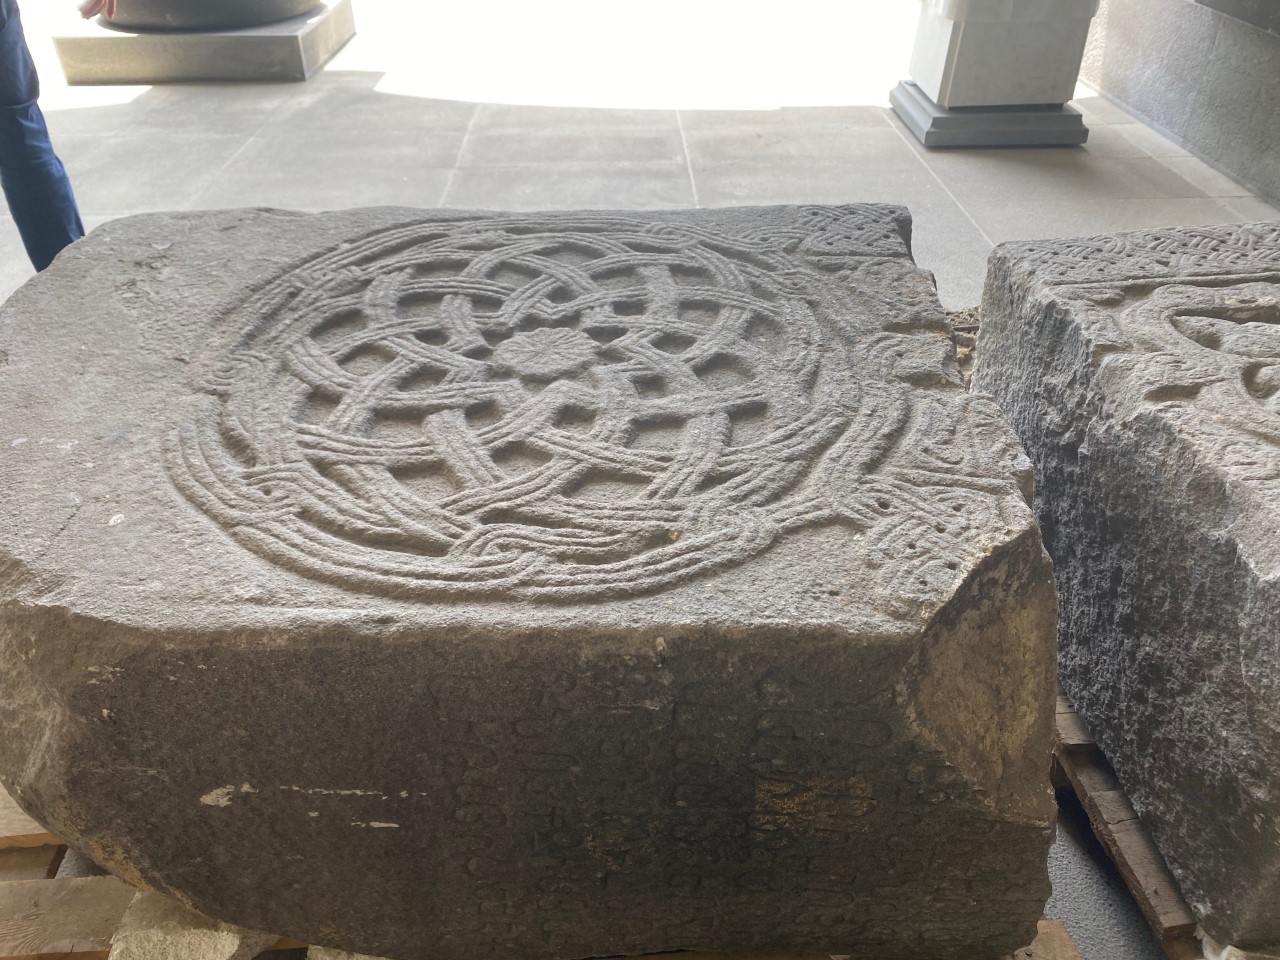 headstone saved from the destruction of Armenian cultural heritage in Artsakh